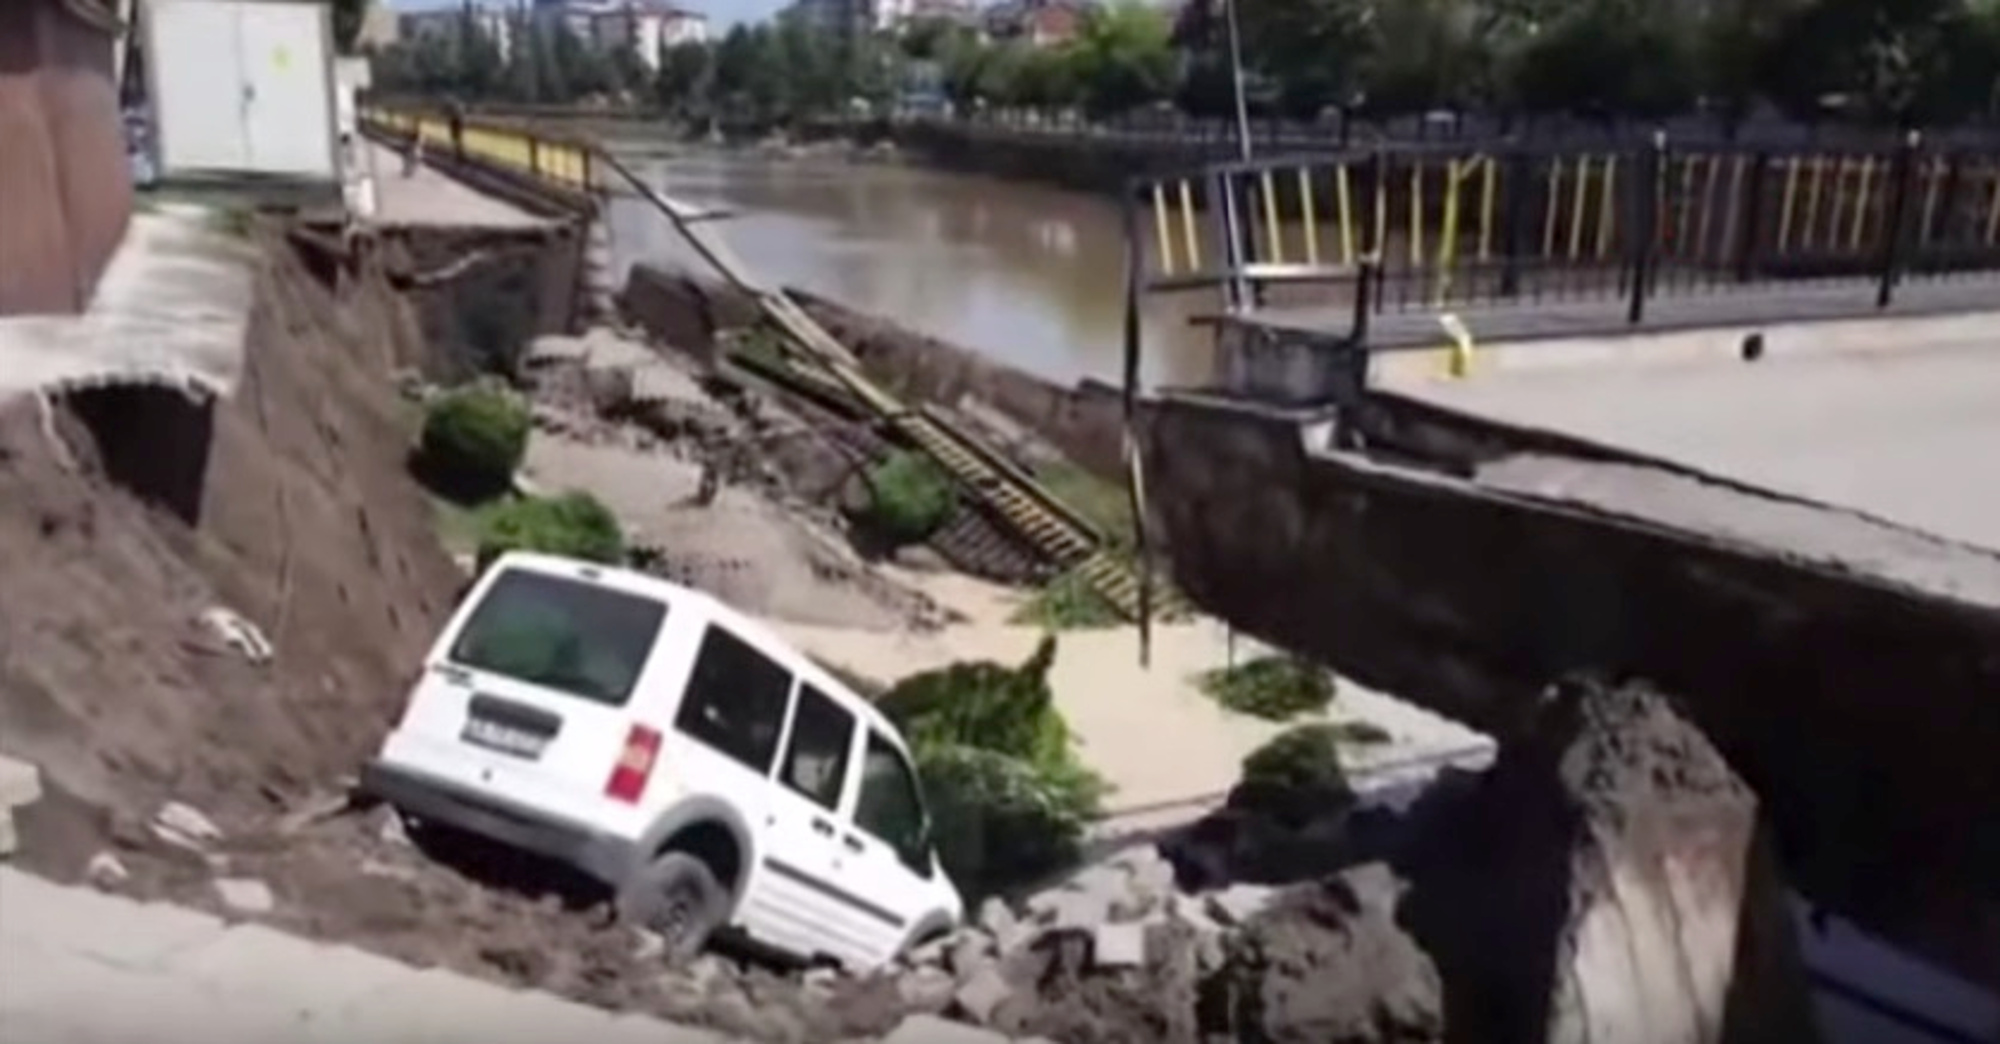 Read more about the article New Bridge Falls Sending Van And Pedestrians Into River